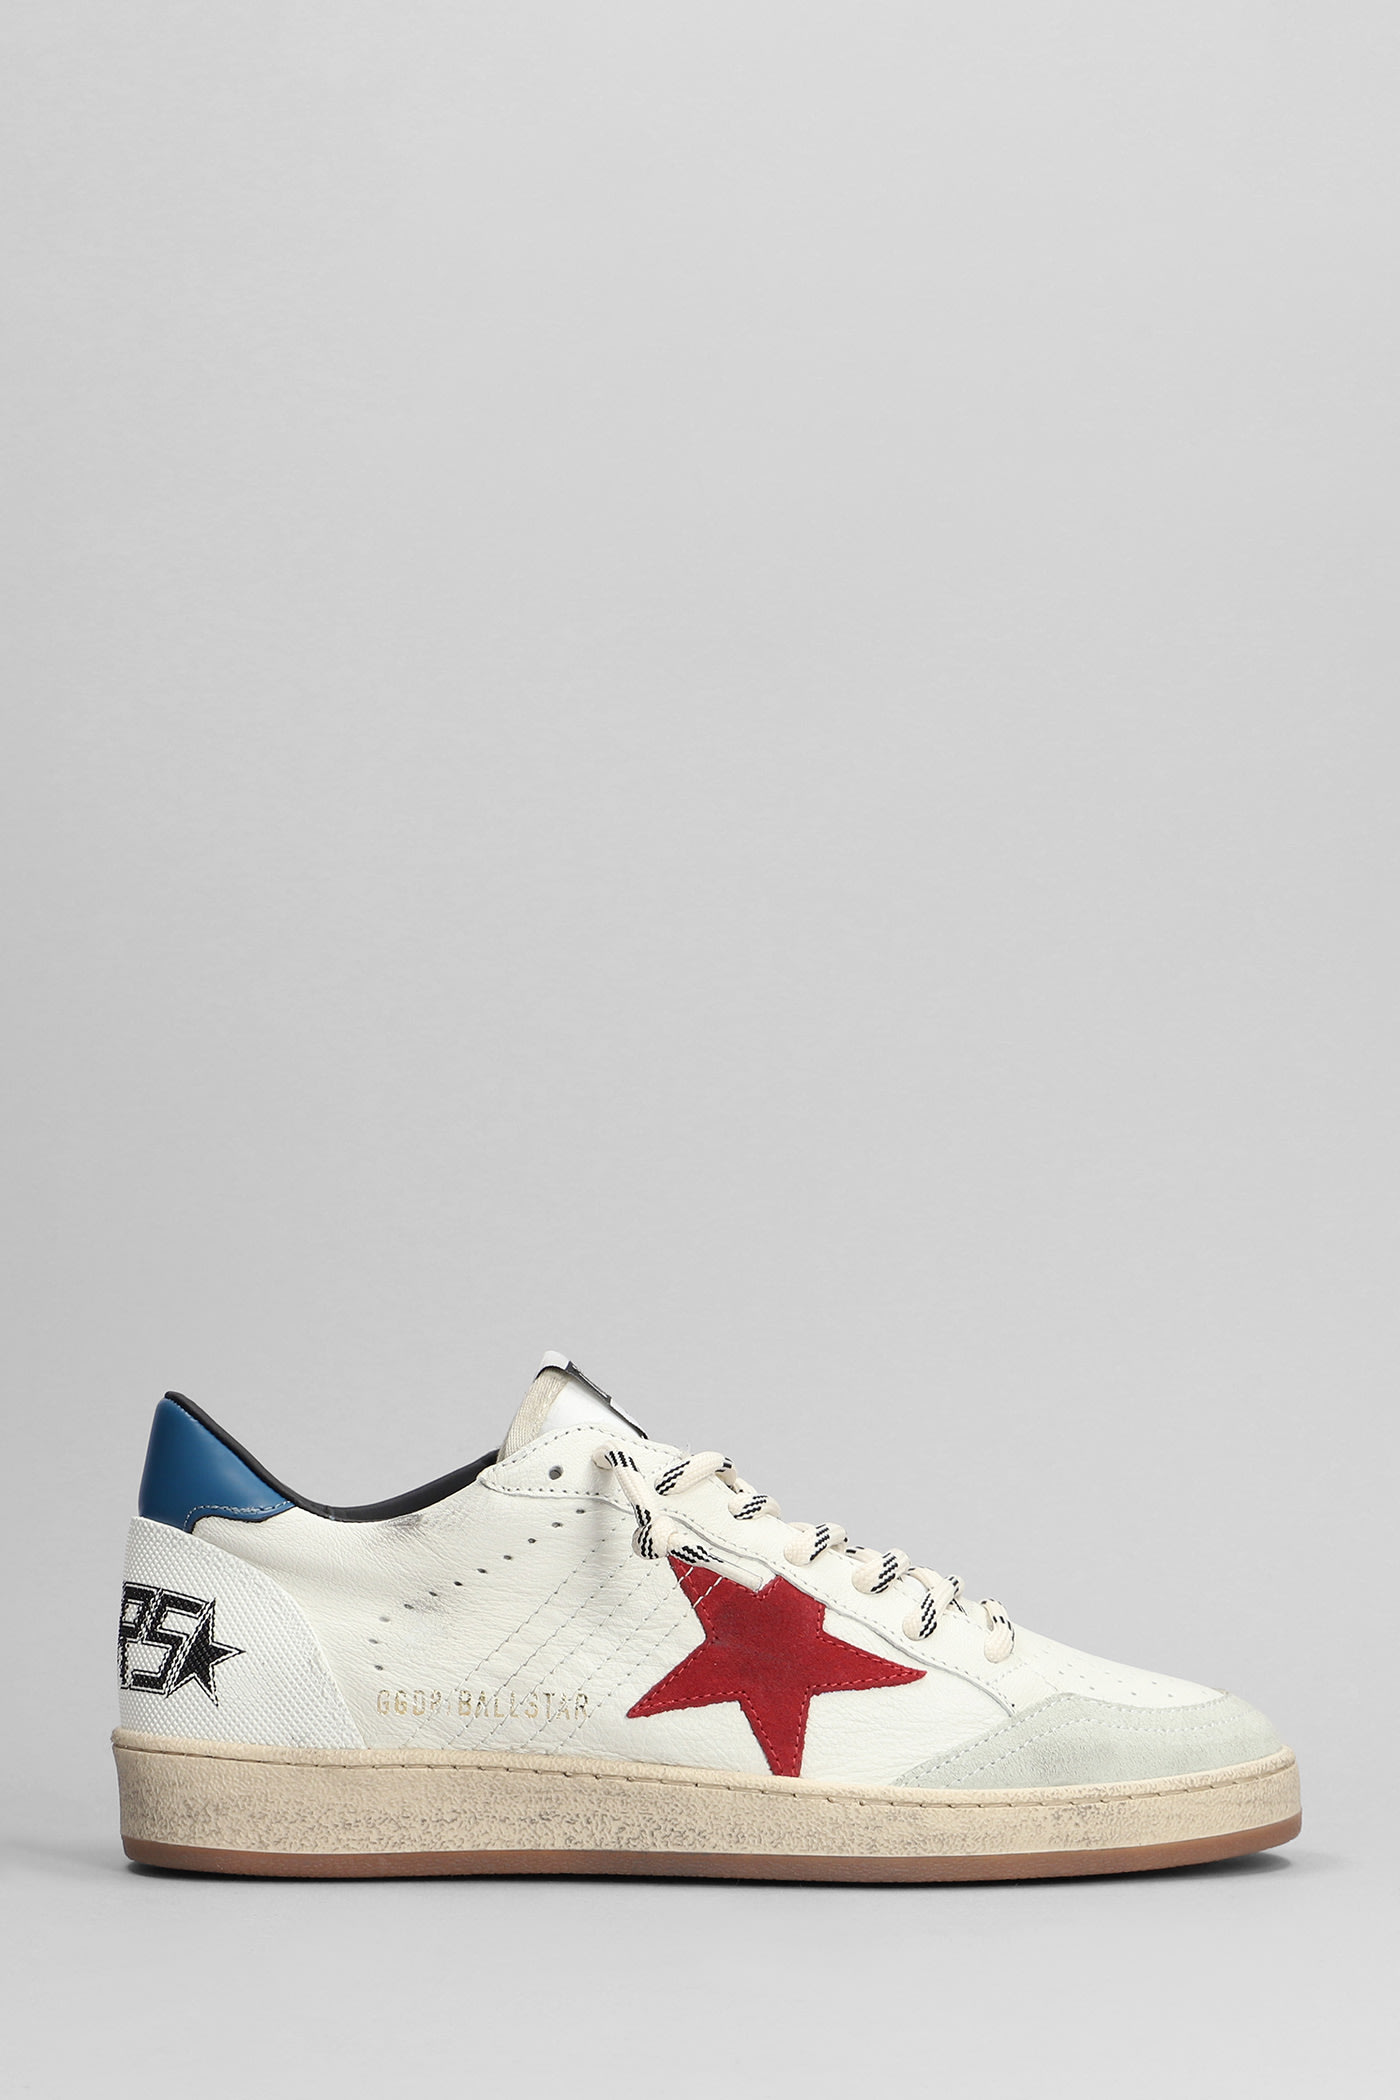 GOLDEN GOOSE BALL STAR SNEAKERS IN WHITE LEATHER